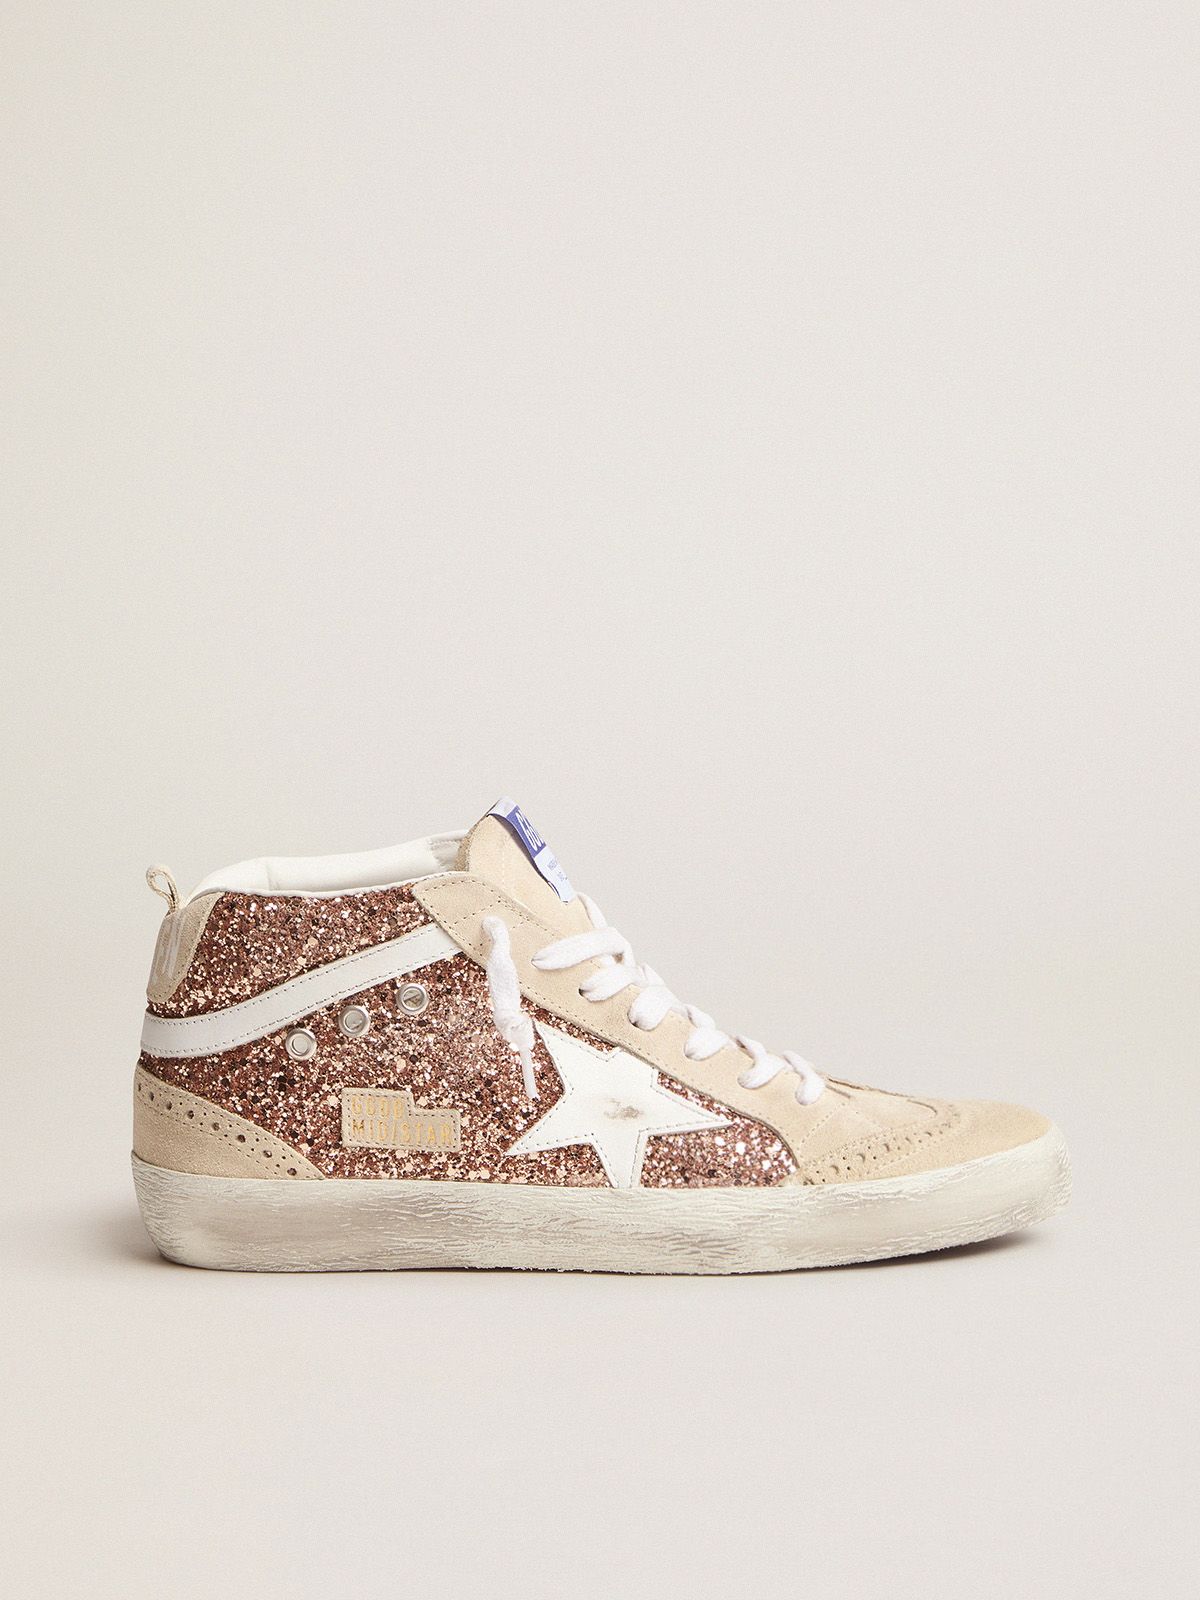 Mid Star sneakers with pink-gold glitter